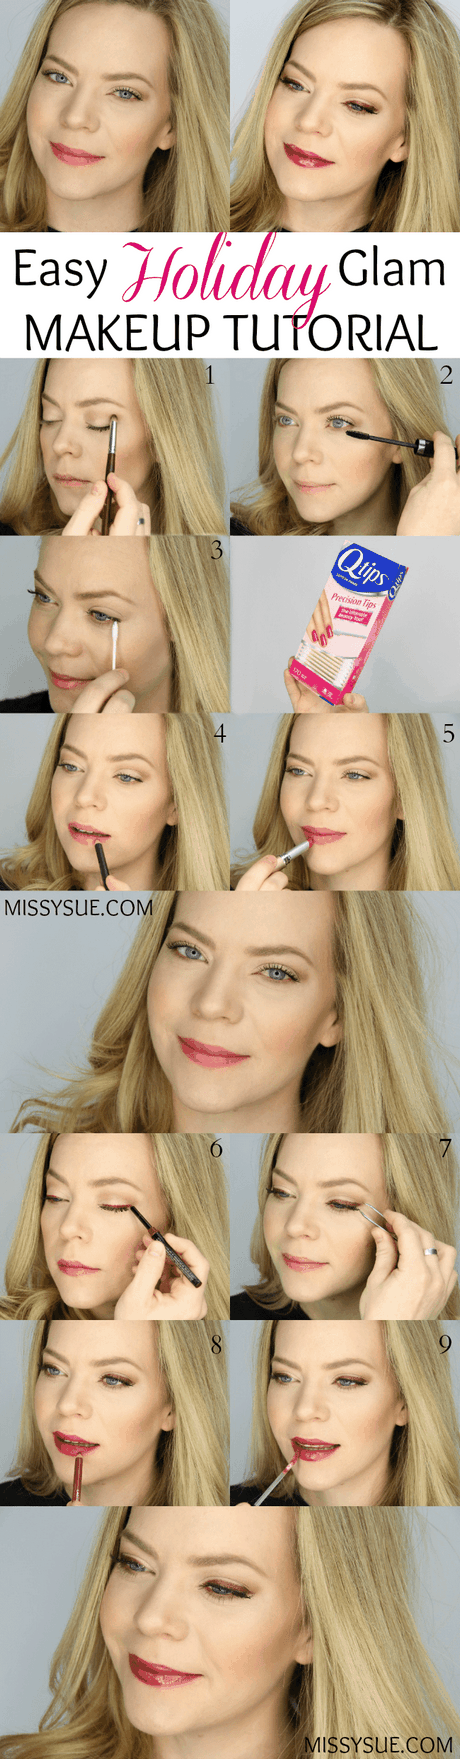 easy-holiday-makeup-tutorial-65_3 Easy holiday make-up tutorial